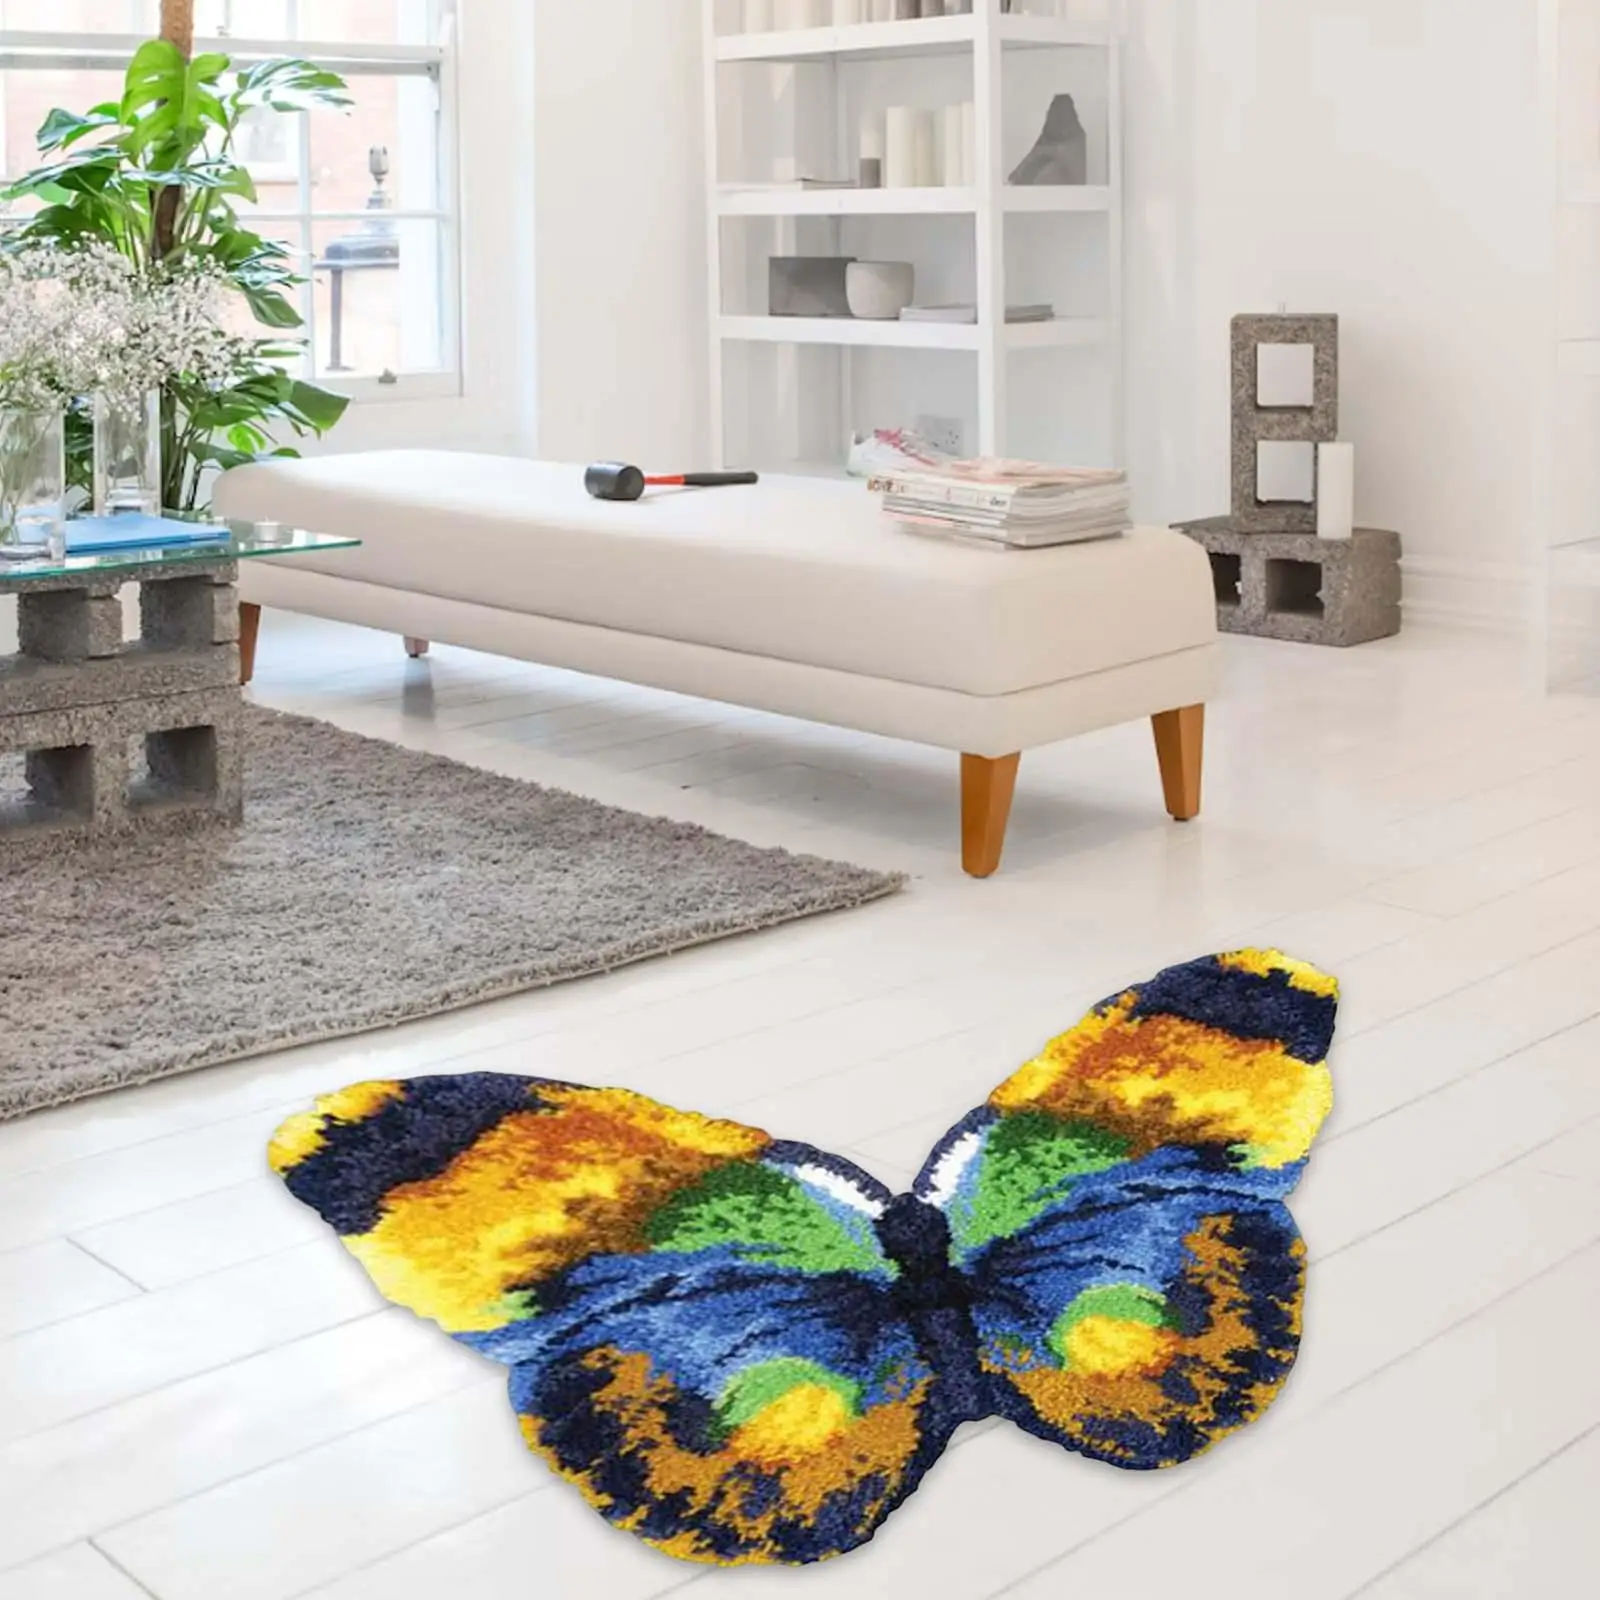 Latch Hook Rug Kit Butterfly DIY Rug Carpet Needlework Home Decoration Latch Hook Kits for Adults for Christmas Adults Beginners